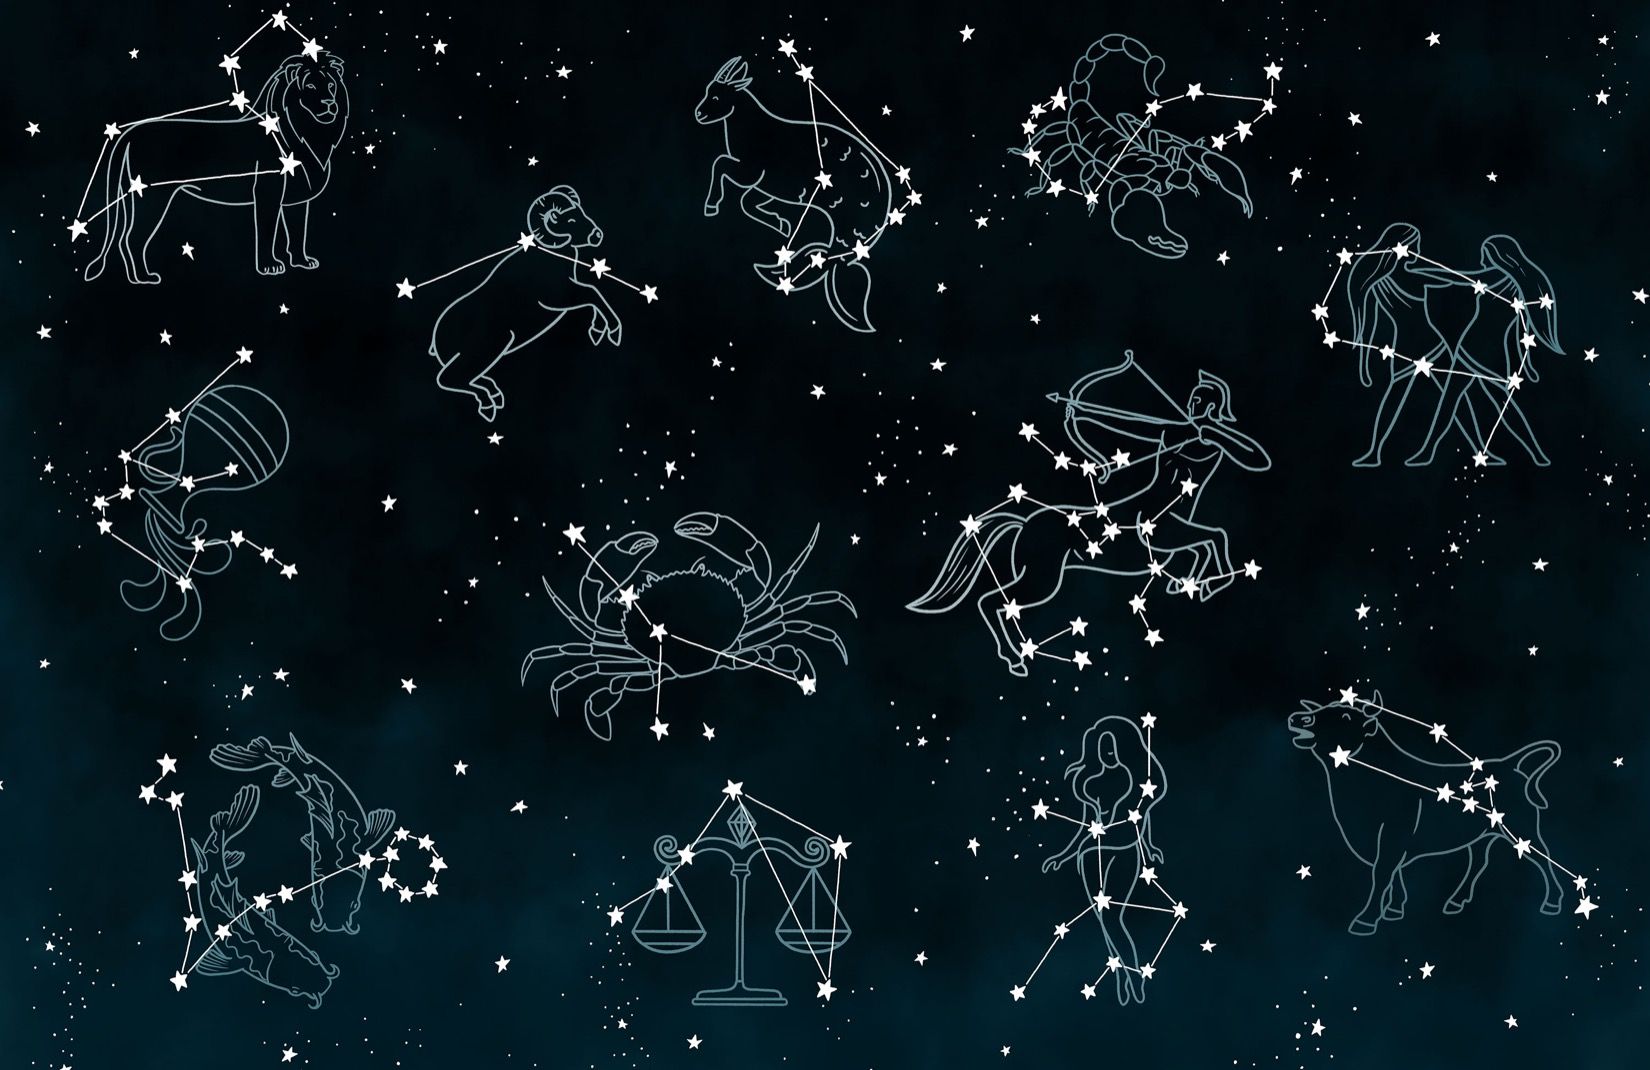 A black background with white stars and constellations of the zodiac signs. - Constellation